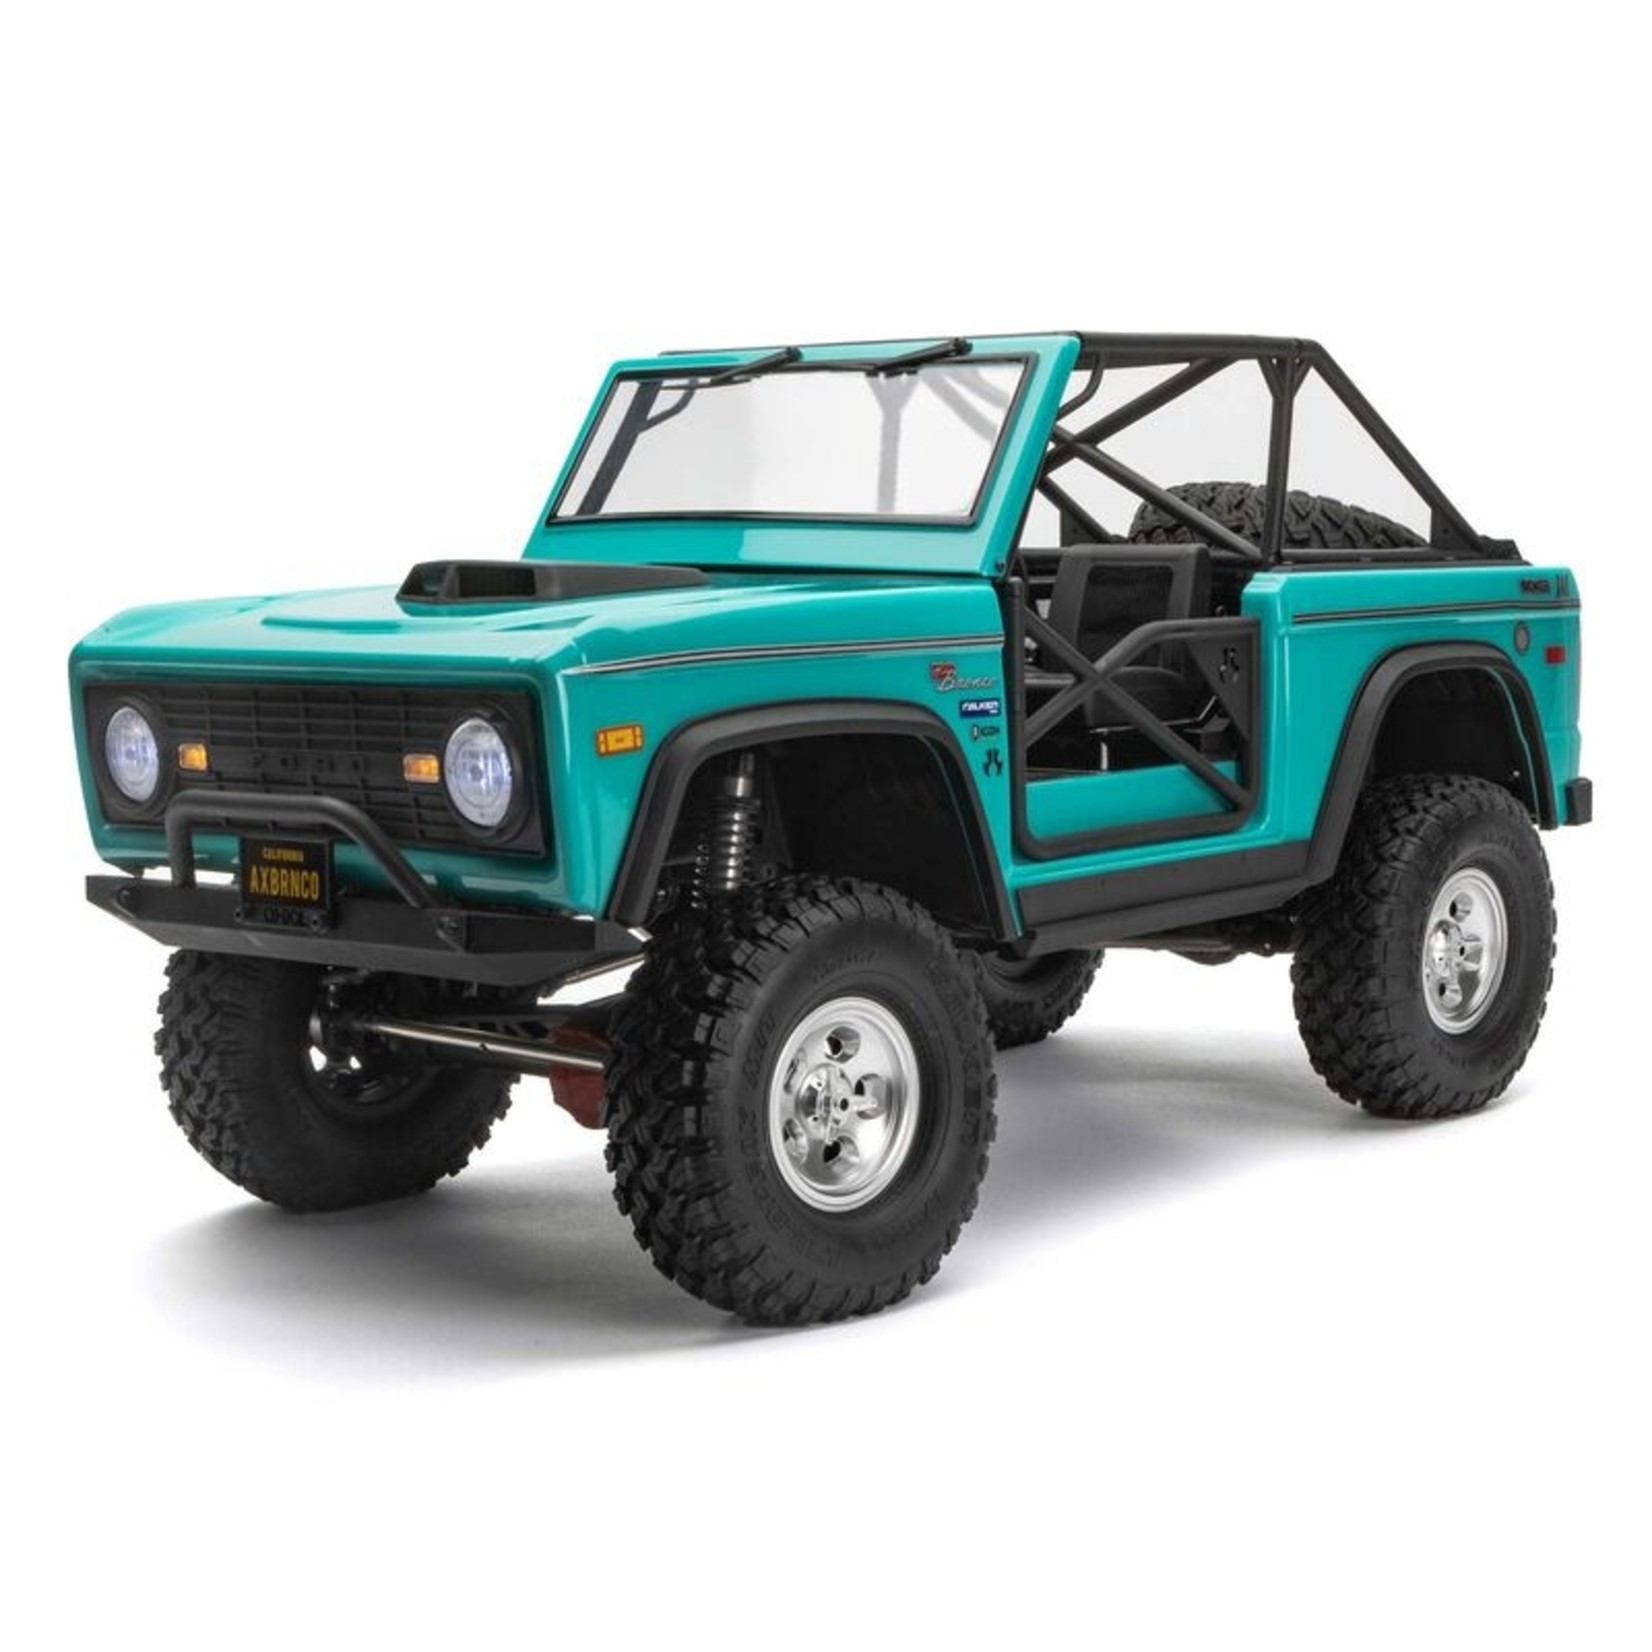 Axial Racing AXI03014T1 1/10 SCX10 III Early Ford Bronco 4WD RTR, Turquoise Blue